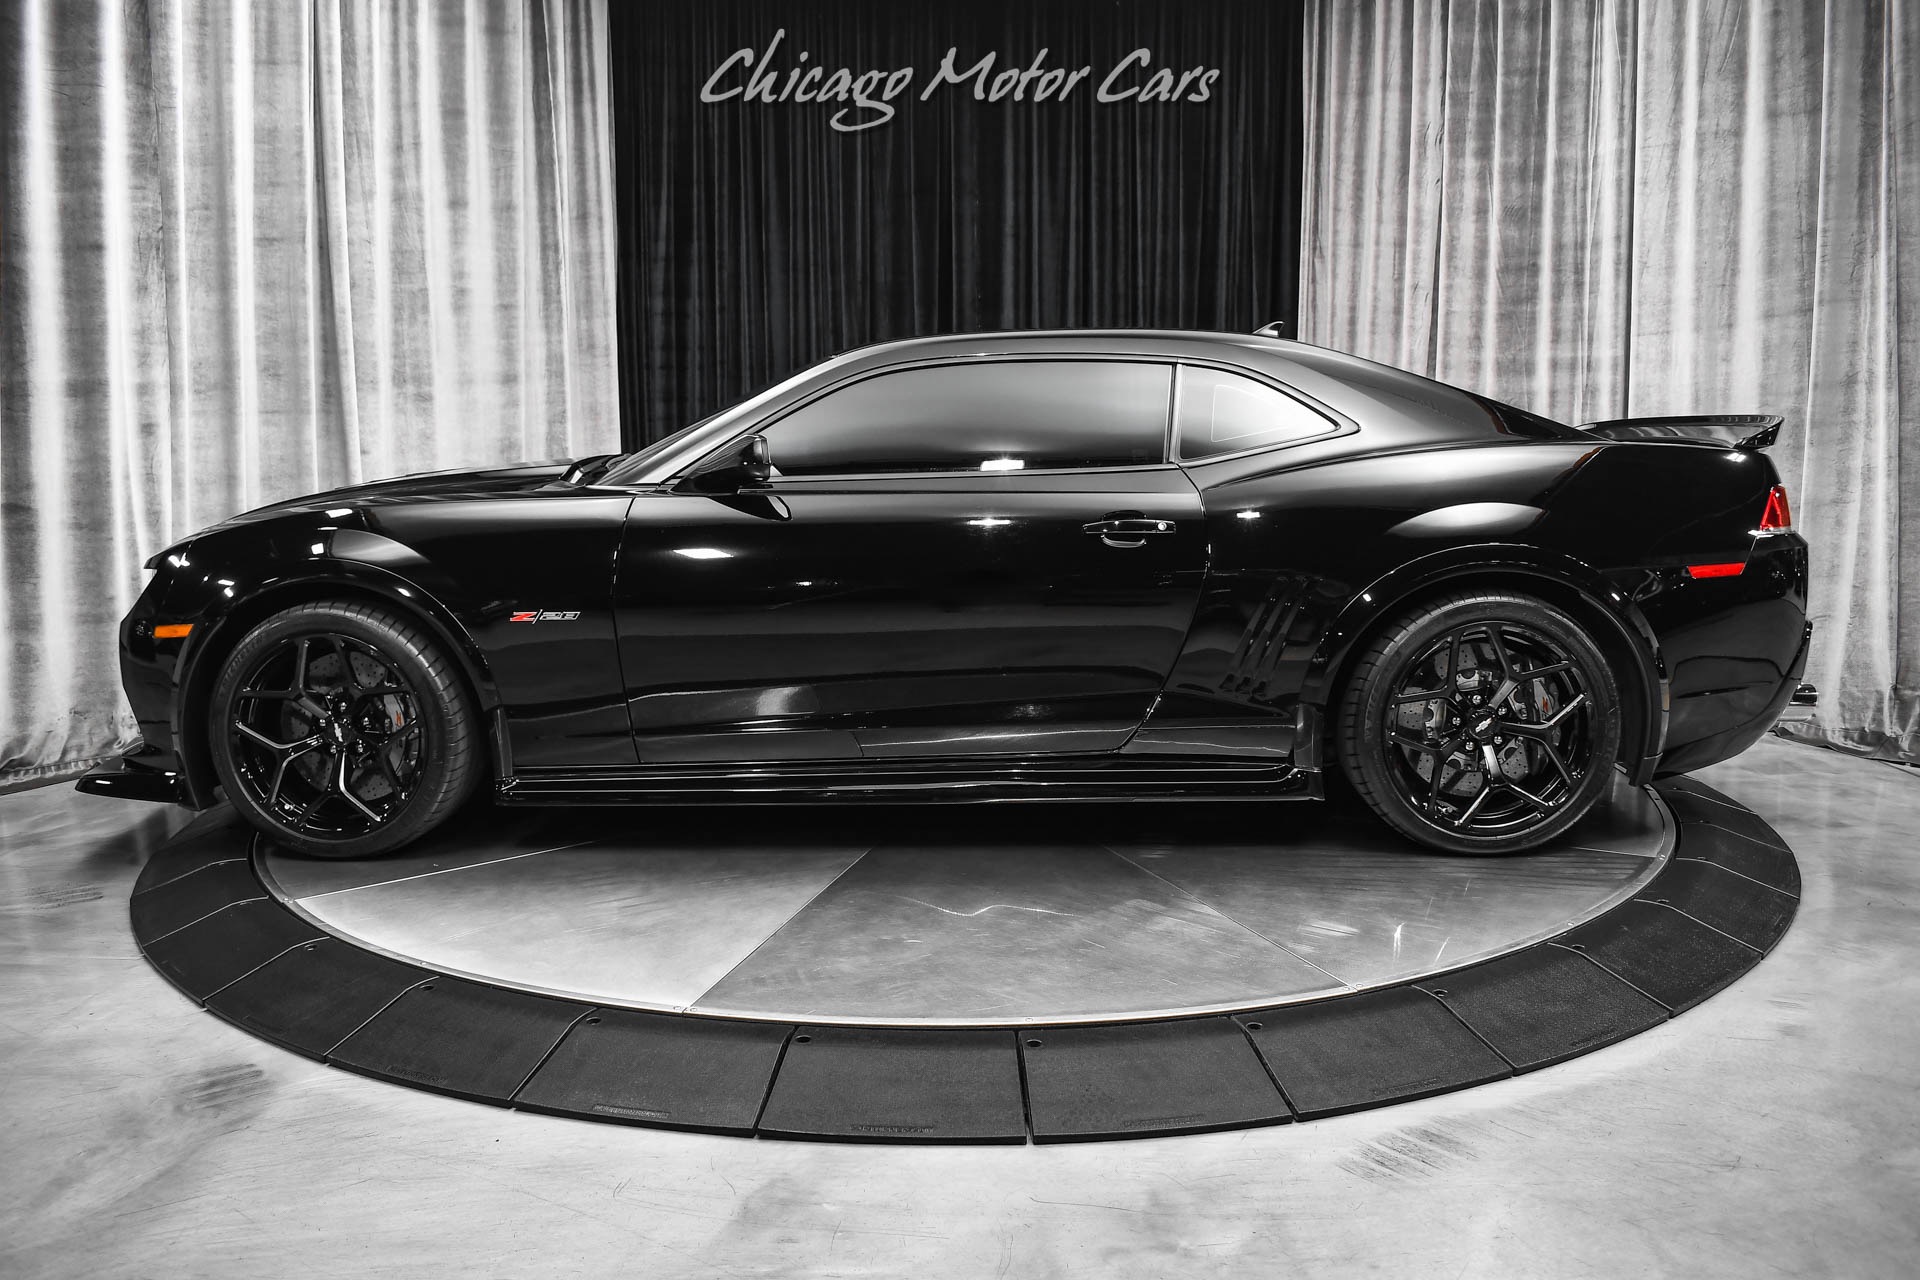 Used-2015-Chevrolet-Camaro-Z28-615RWHP-Full-Exhaust-Stage-4-Cam-RARE-427